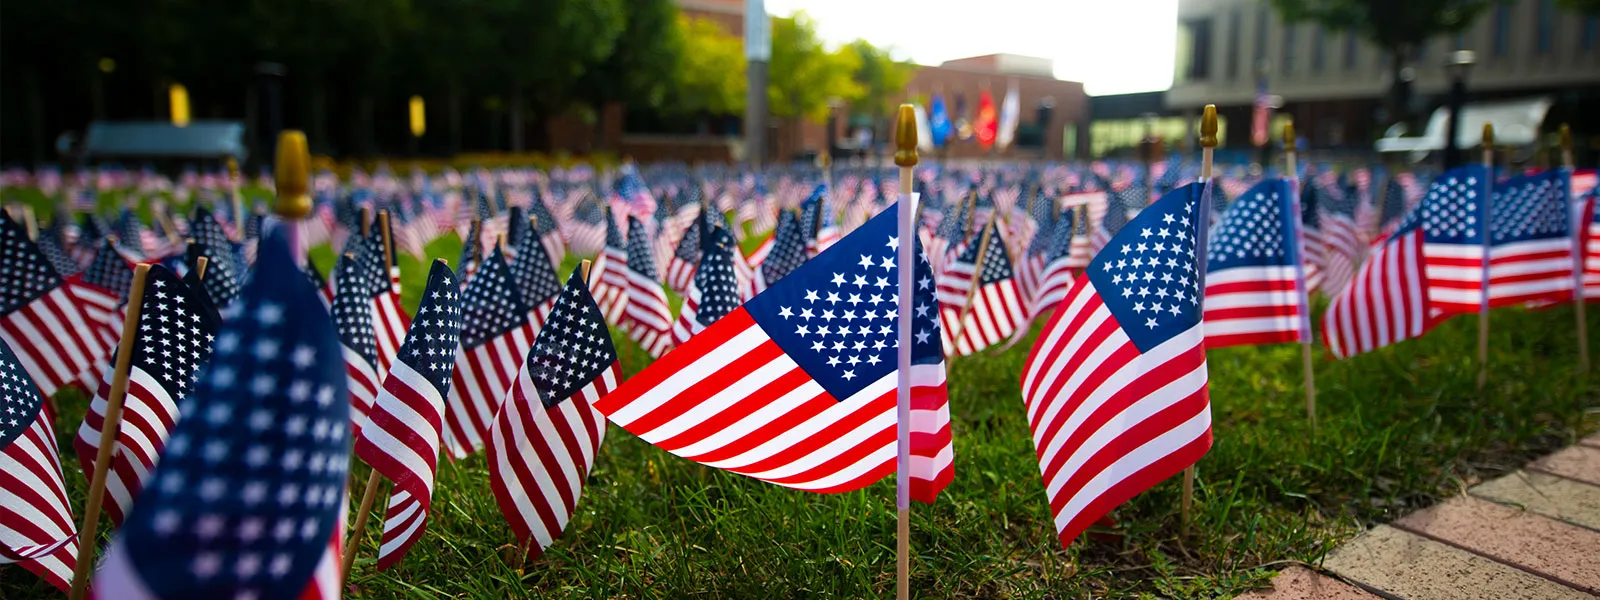 Dozens of American flags move with the wind in the ECC courtyard.